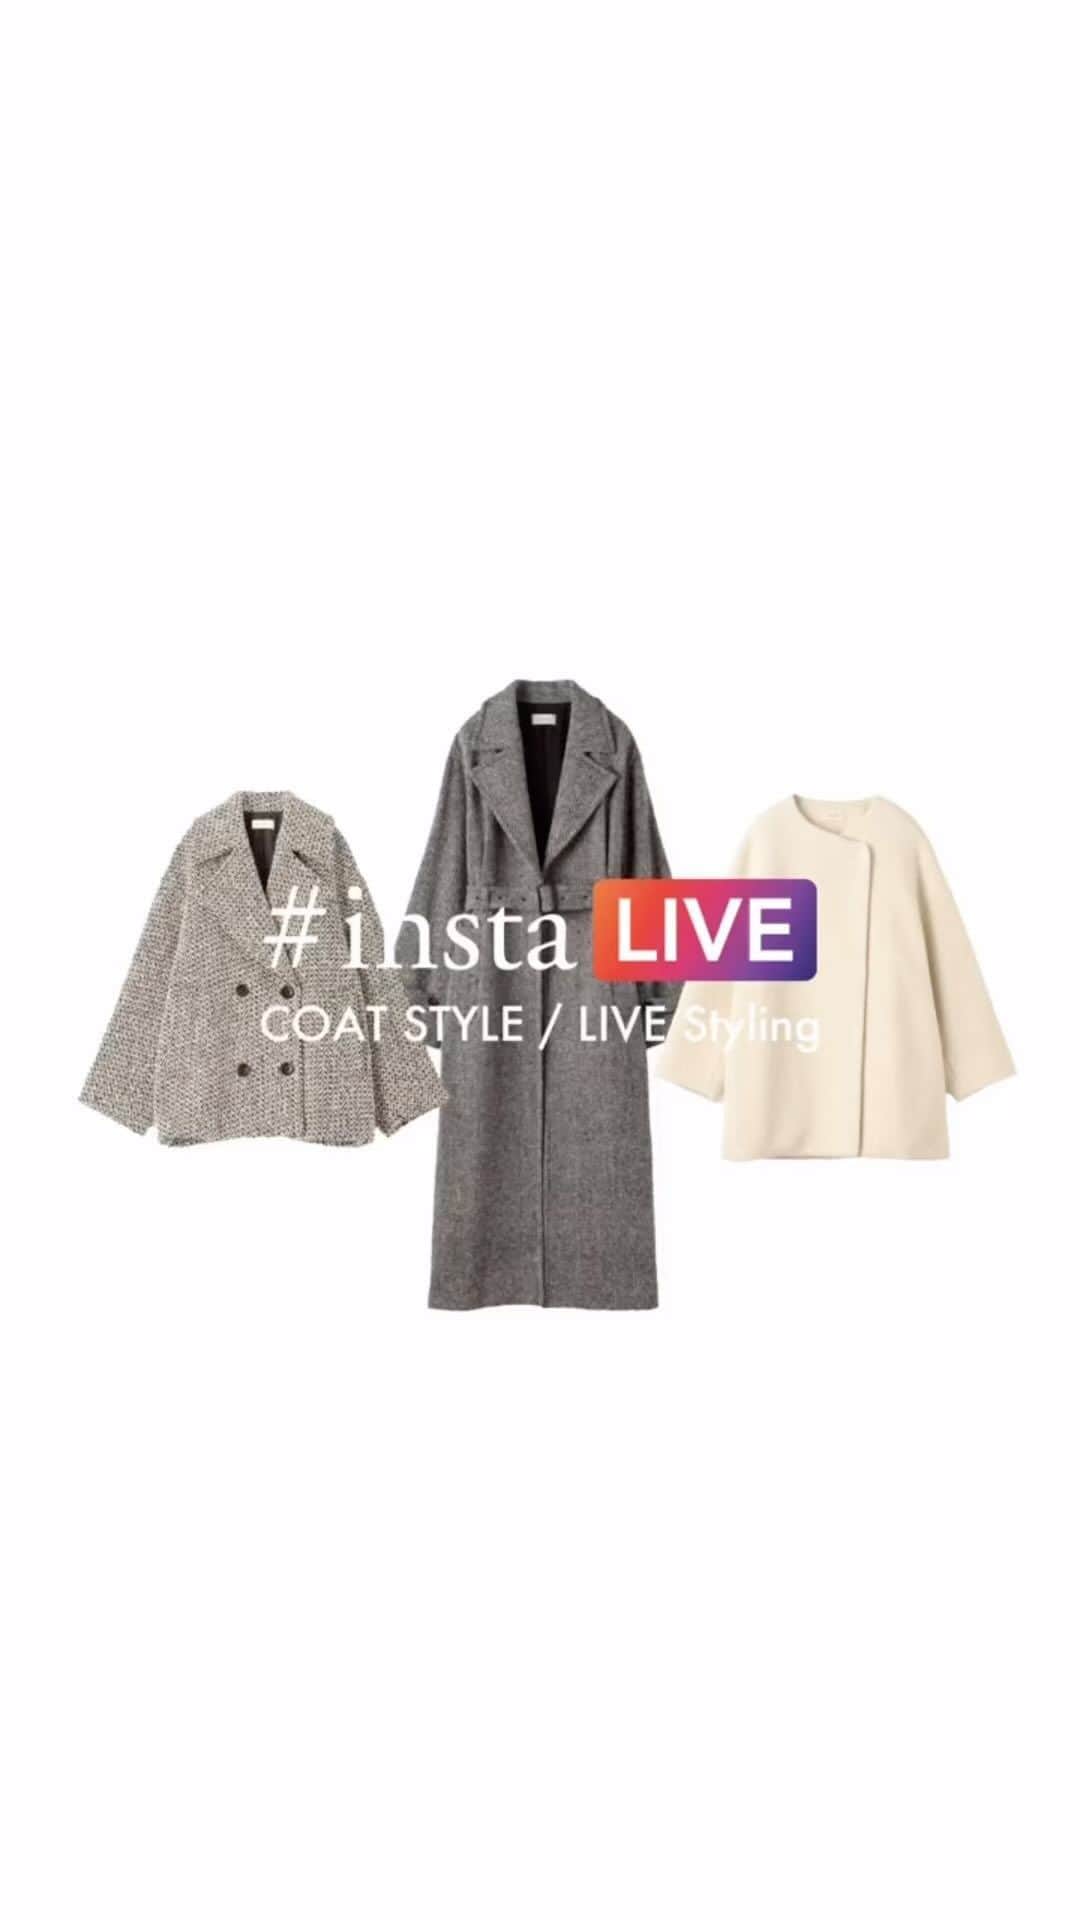 DES PRESのインスタグラム：「11.16 thu. instaLIVE Styling “2023 WINTER COAT STYLE vol.2” LIVEスタイリングをダイジェストでご紹介！  Style1 COAT / 22-08-34-08307 / ¥89,650 @despres_jp KNIT / 26-12-35-12008 / ¥80,300 @christianwijnants  SKIRT / 22-05-34-05307 / ¥44,000 @despres_jp SCARF / 26-04-35-04008 / ¥29,700 @gmsc SHOES / 26-01-35-01004 / ¥132,000  Style 2 COAT / 22-08-34-08310 / ¥209,000 @despres_jp KNIT / 22-02-34-02701 / ¥28,600 @despres_jp ALL IN ONE / 22-06-34-06205 / ¥39,600 @despres_jp SHOES / 26-01-35-01028 / ¥44,000 @despres_jp  Style 3 COAT / 22-08-34-08306 / ¥99,000 @despres_jp KNIT / 22-02-34-02107 / ¥24,200 @despres_jp PANTS / 26-14-35-14015 / ¥69,300 @robertomusso.trunkshow  SHOES / 26-01-35-01016 / ¥106,700 @dear_frances   #despres_instalive_2023 #instalive_dp_styling #instalive #fashion #despres #style」